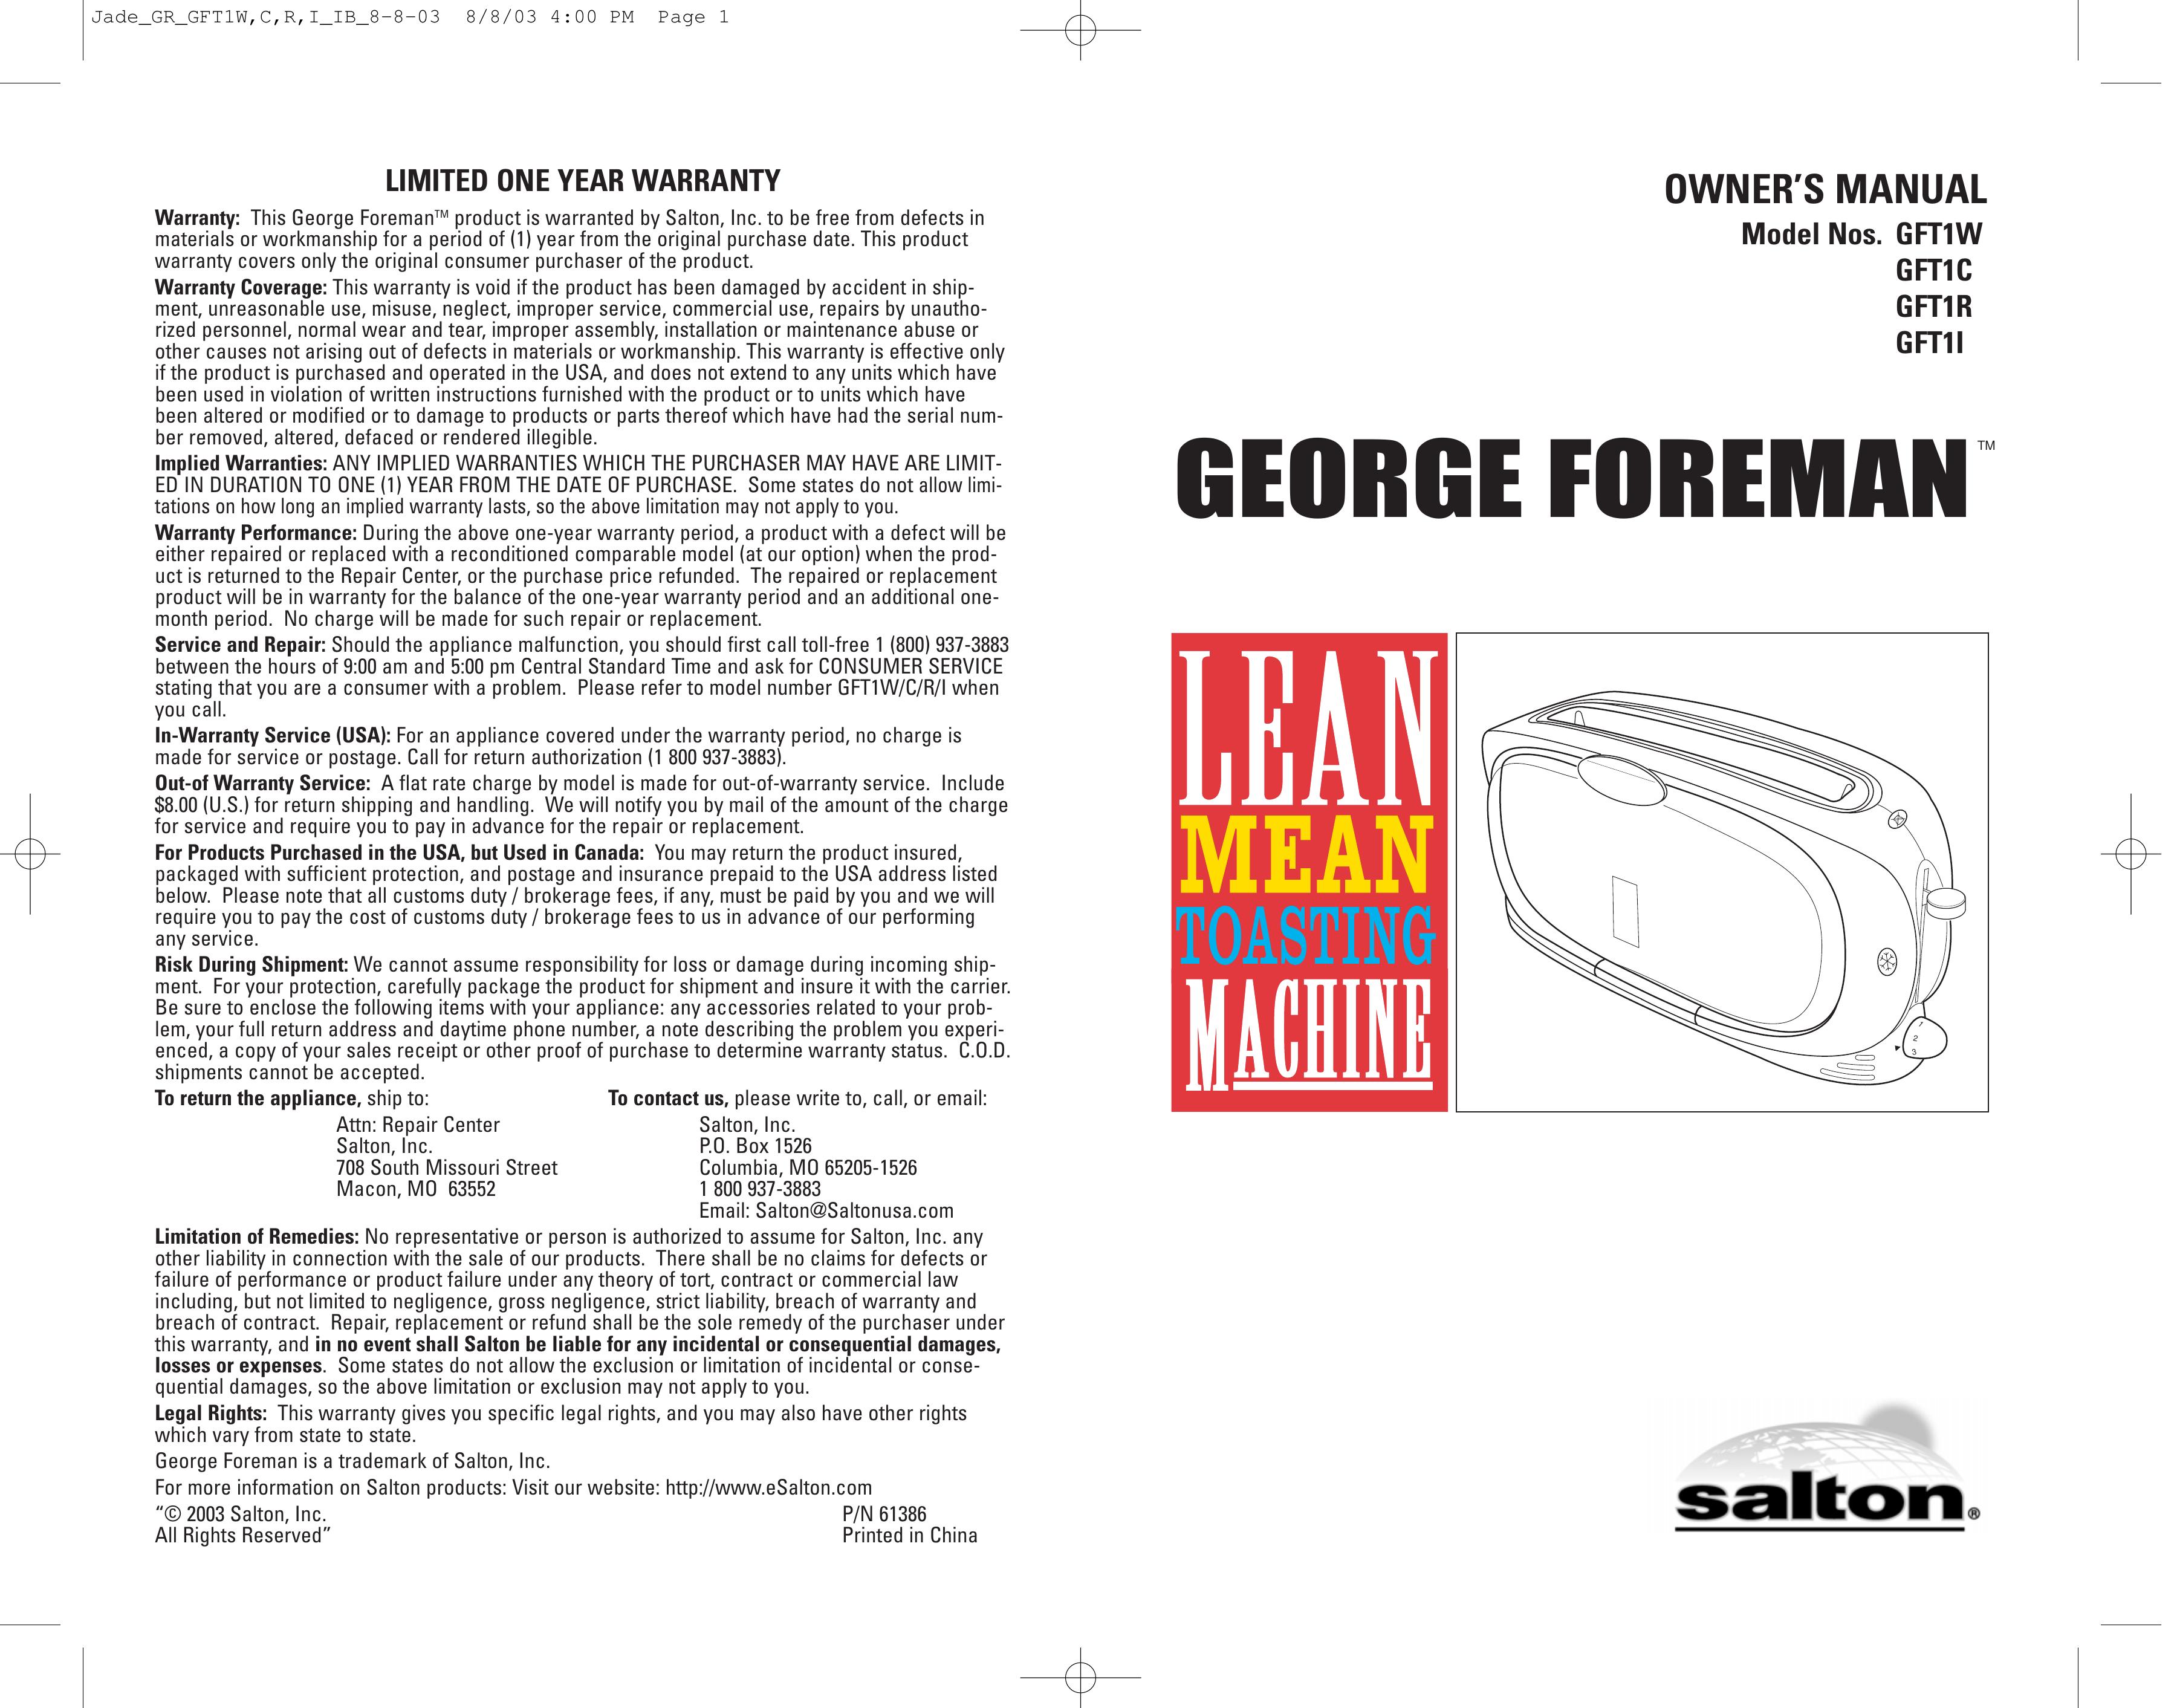 George Foreman GFT1R Toaster User Manual